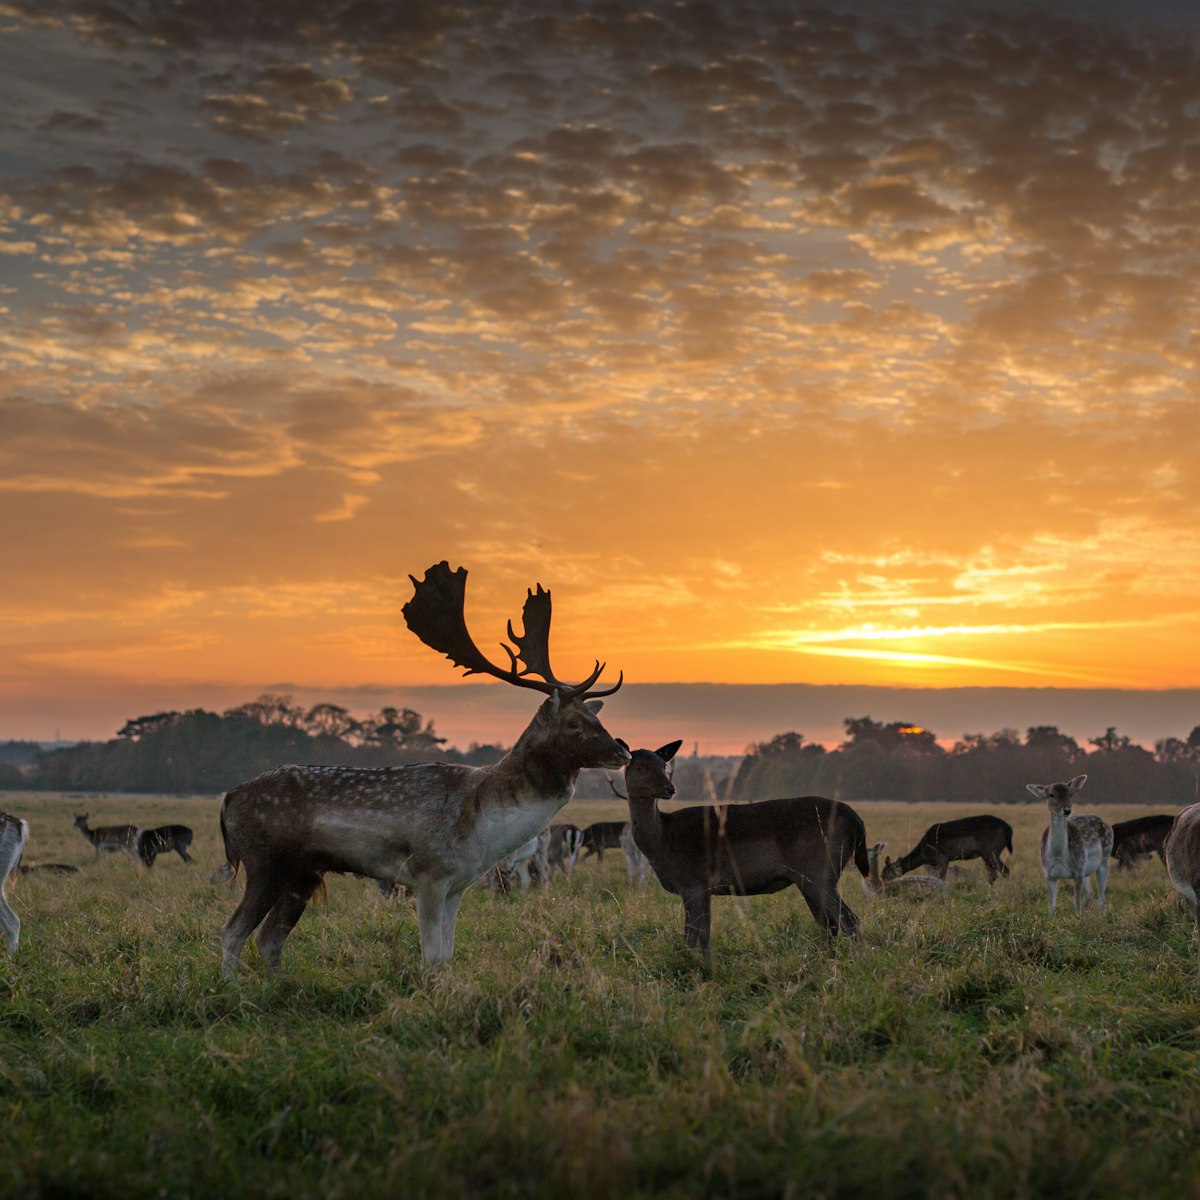 A stag stands in front of a herd of deer under a beautiful summer sunset in Phoenix Park, Dublin, Ireland, on a grassy plain with clumps of trees in the distance